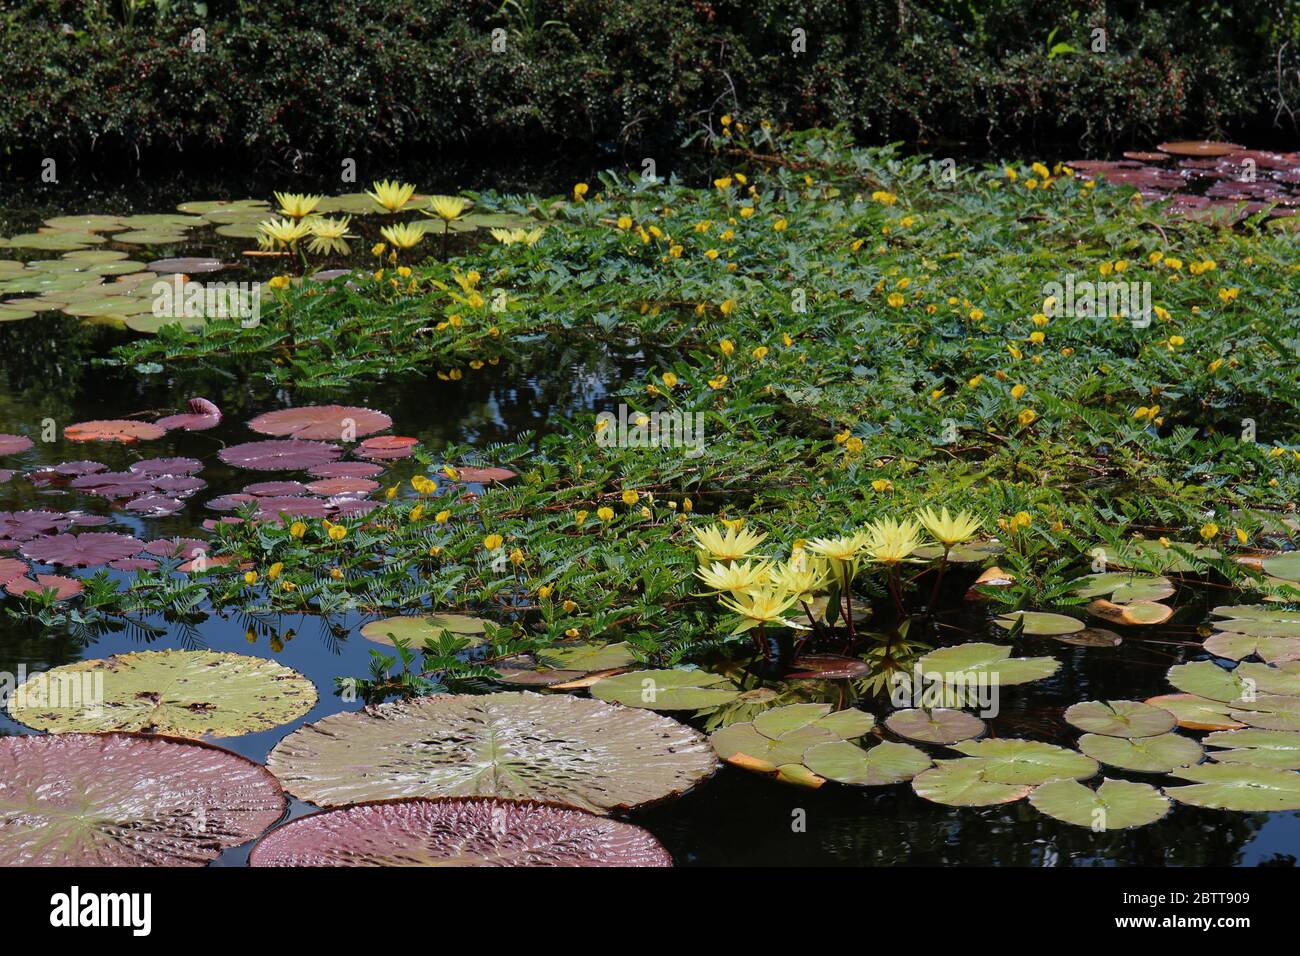 A large pond filled with yellow water lily flowers, large lily pads and Botswana Wonder surrounded by Cotoneaster plants Stock Photo